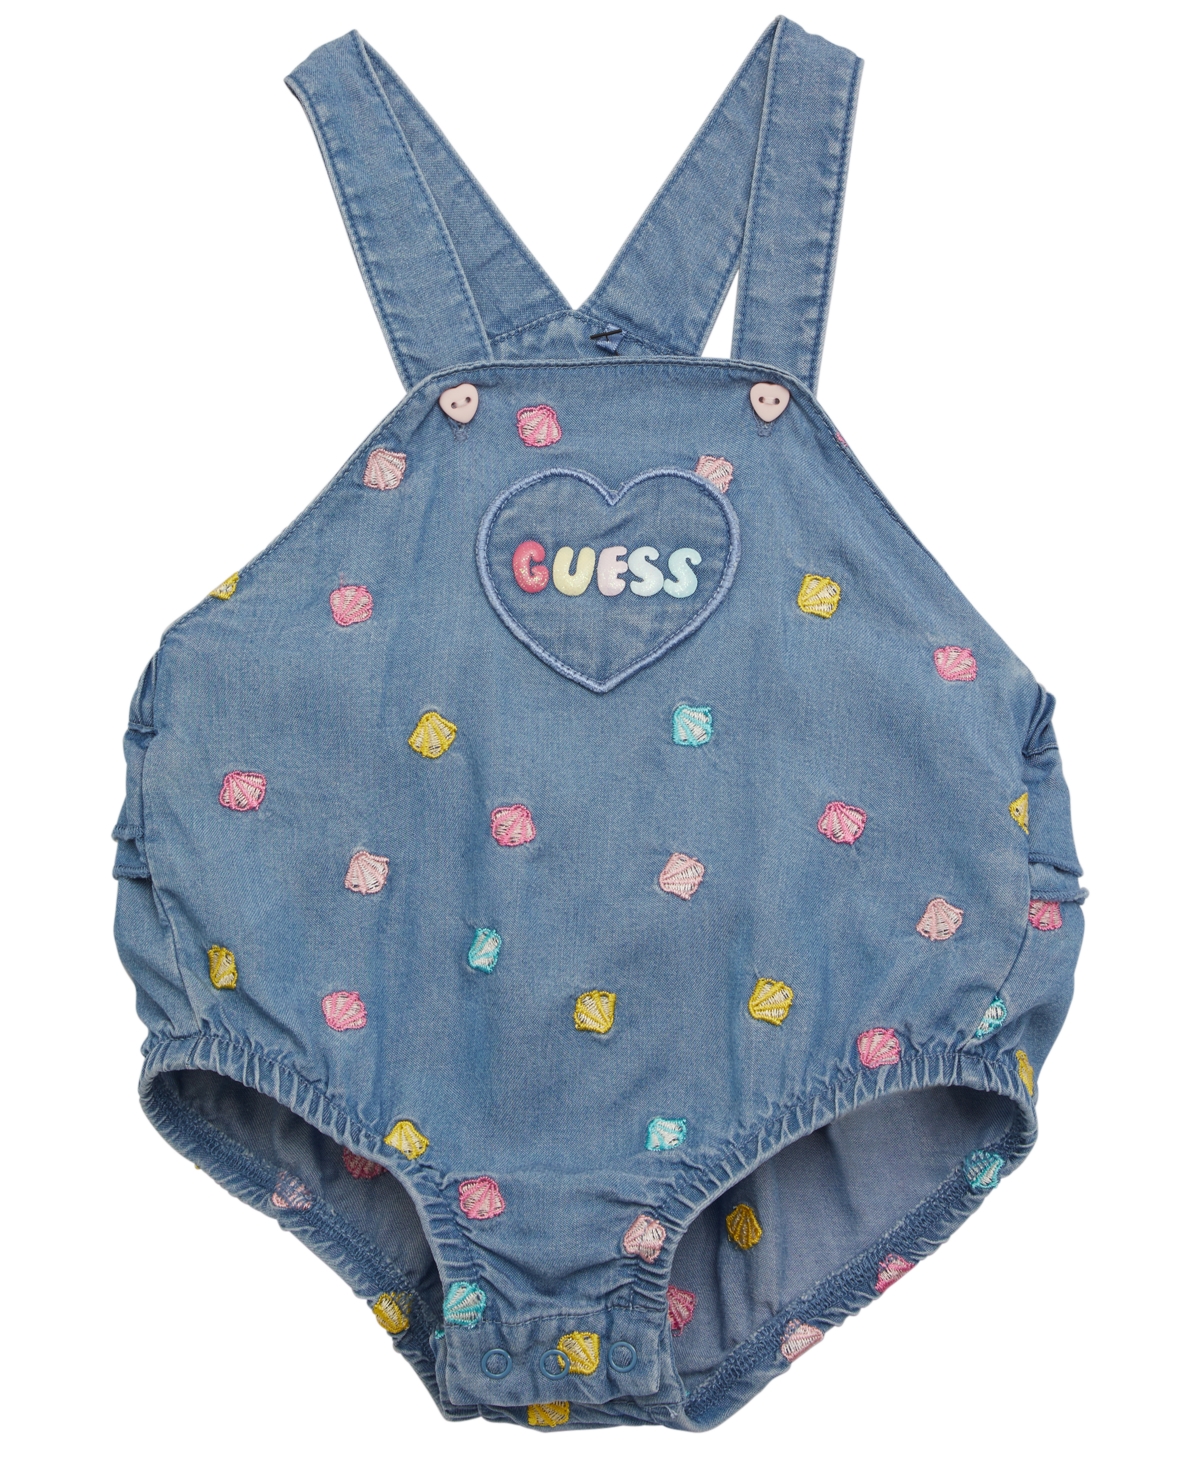 Shop Guess Baby Girls Bodysuit And Embroidered Bubble In Ballet Pink